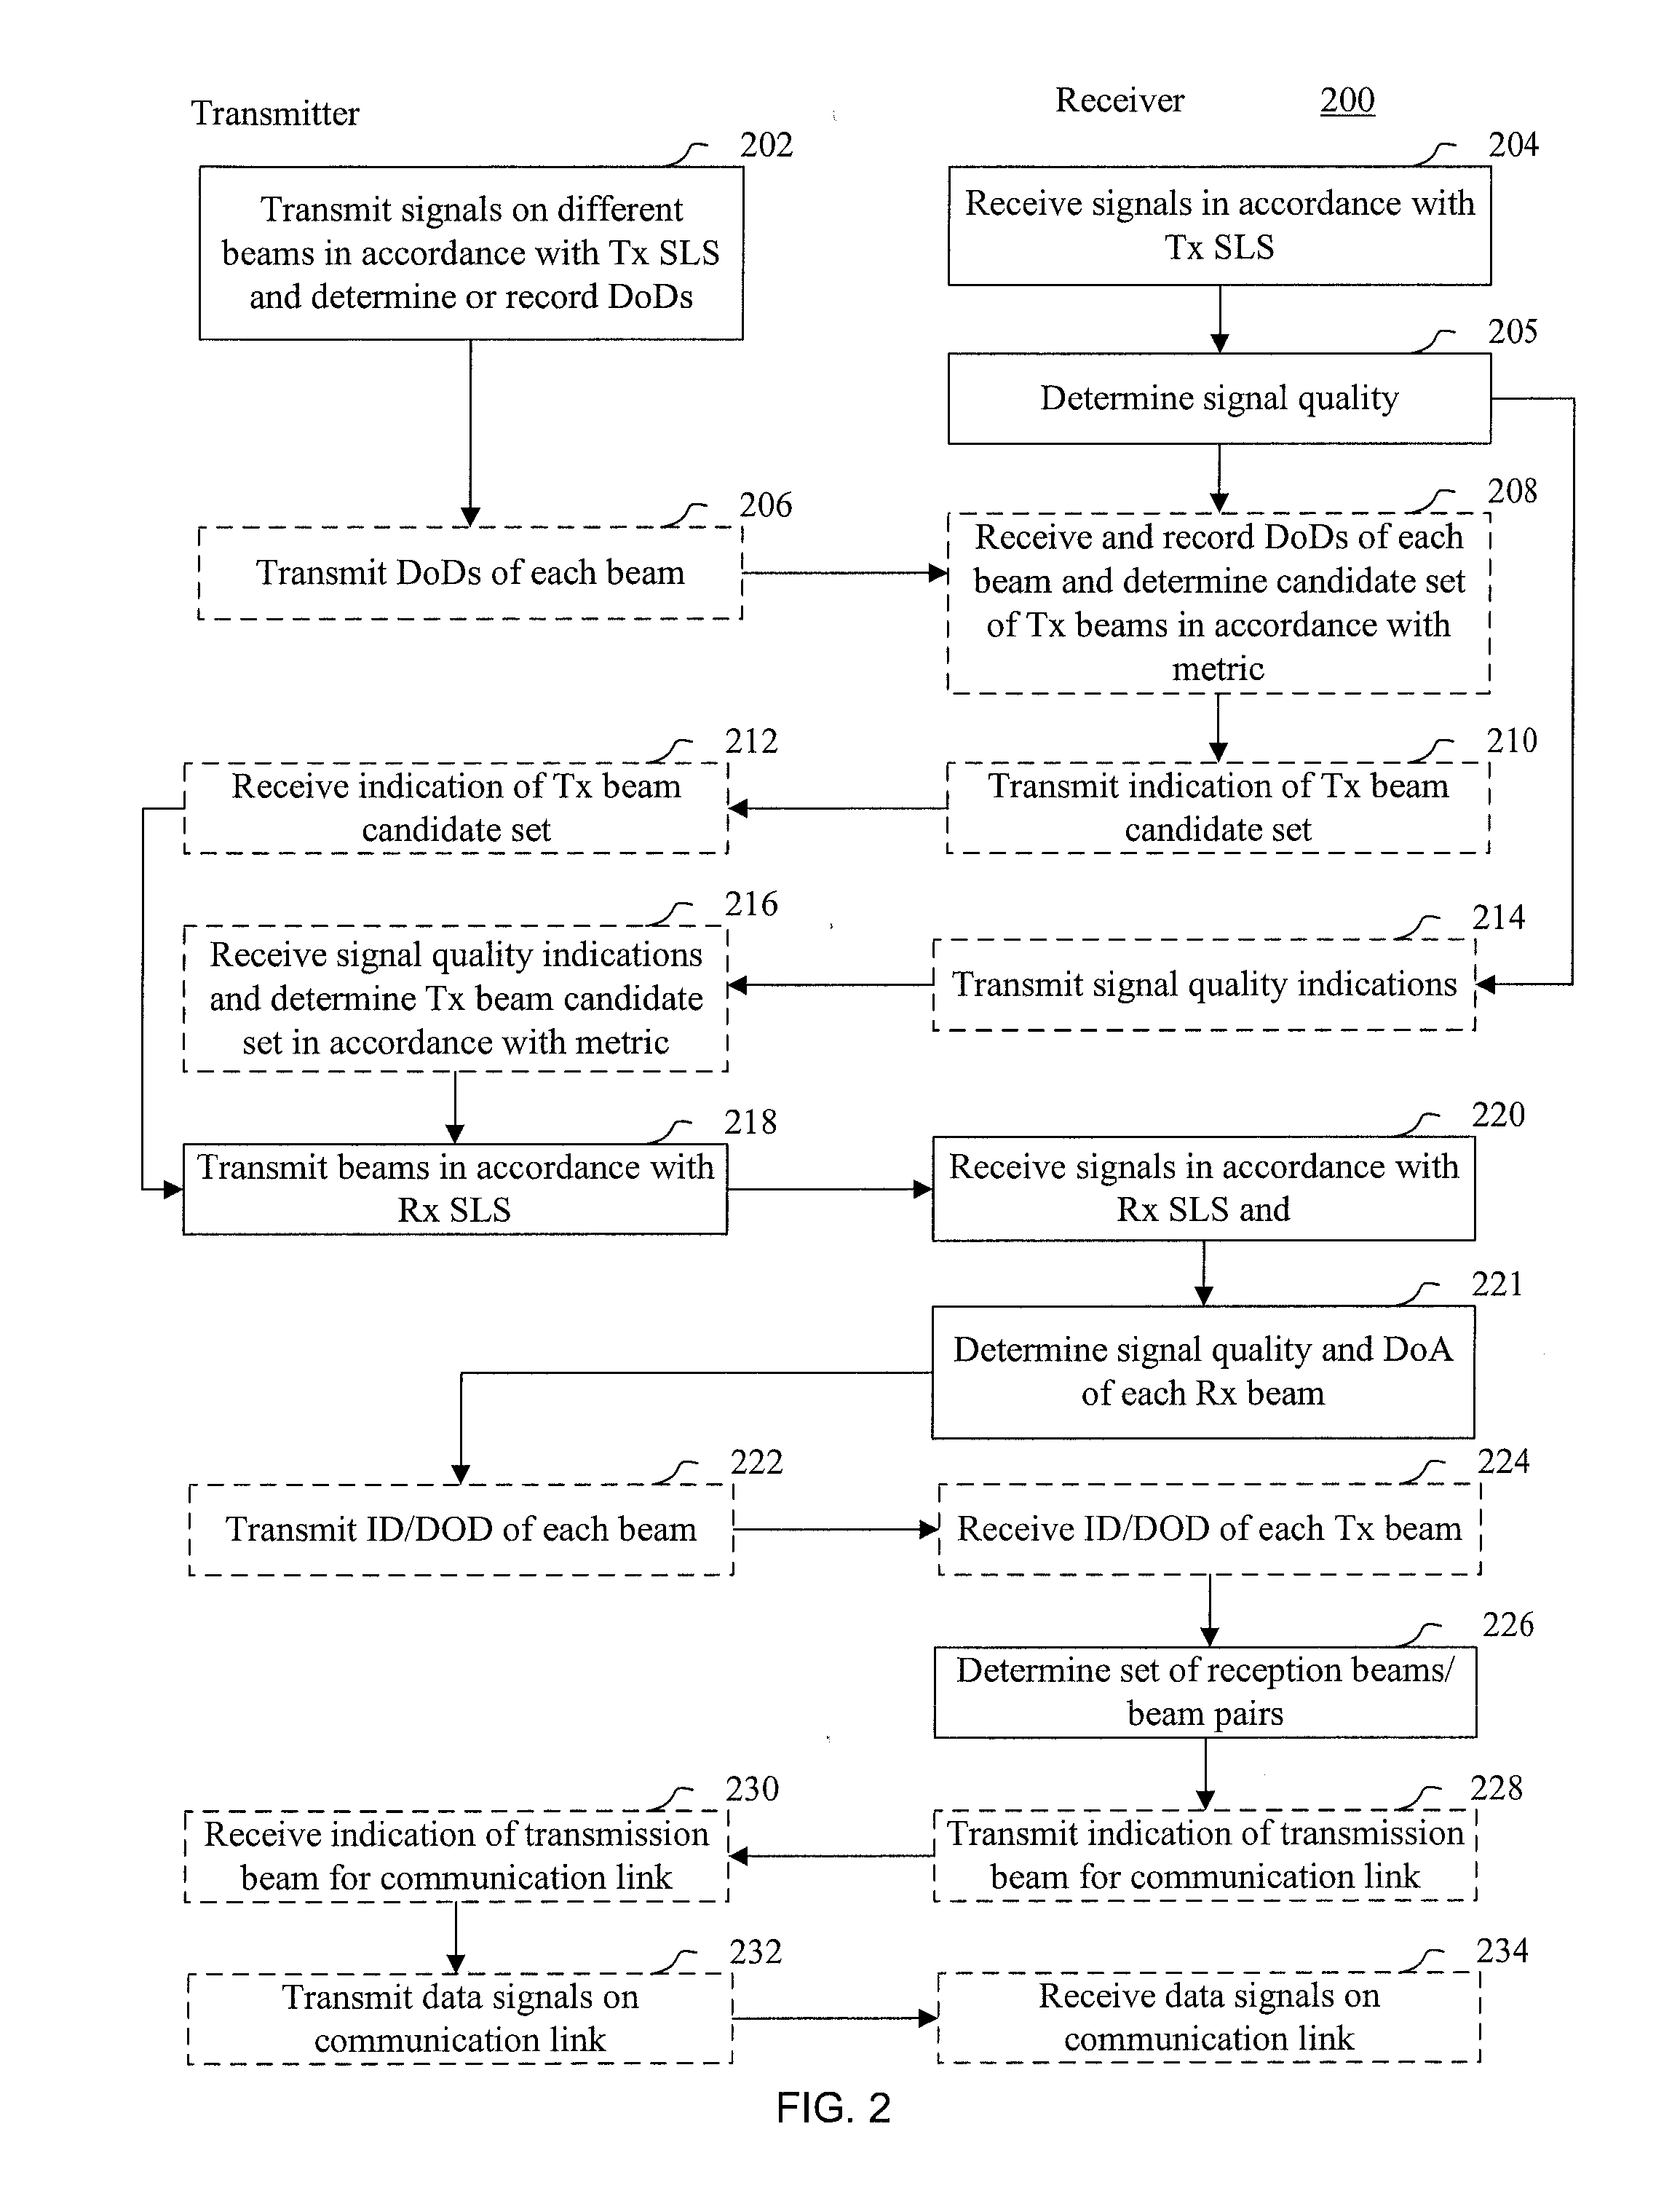 Systems and methods for prioritizing beams to enable efficient determination of suitable communication links